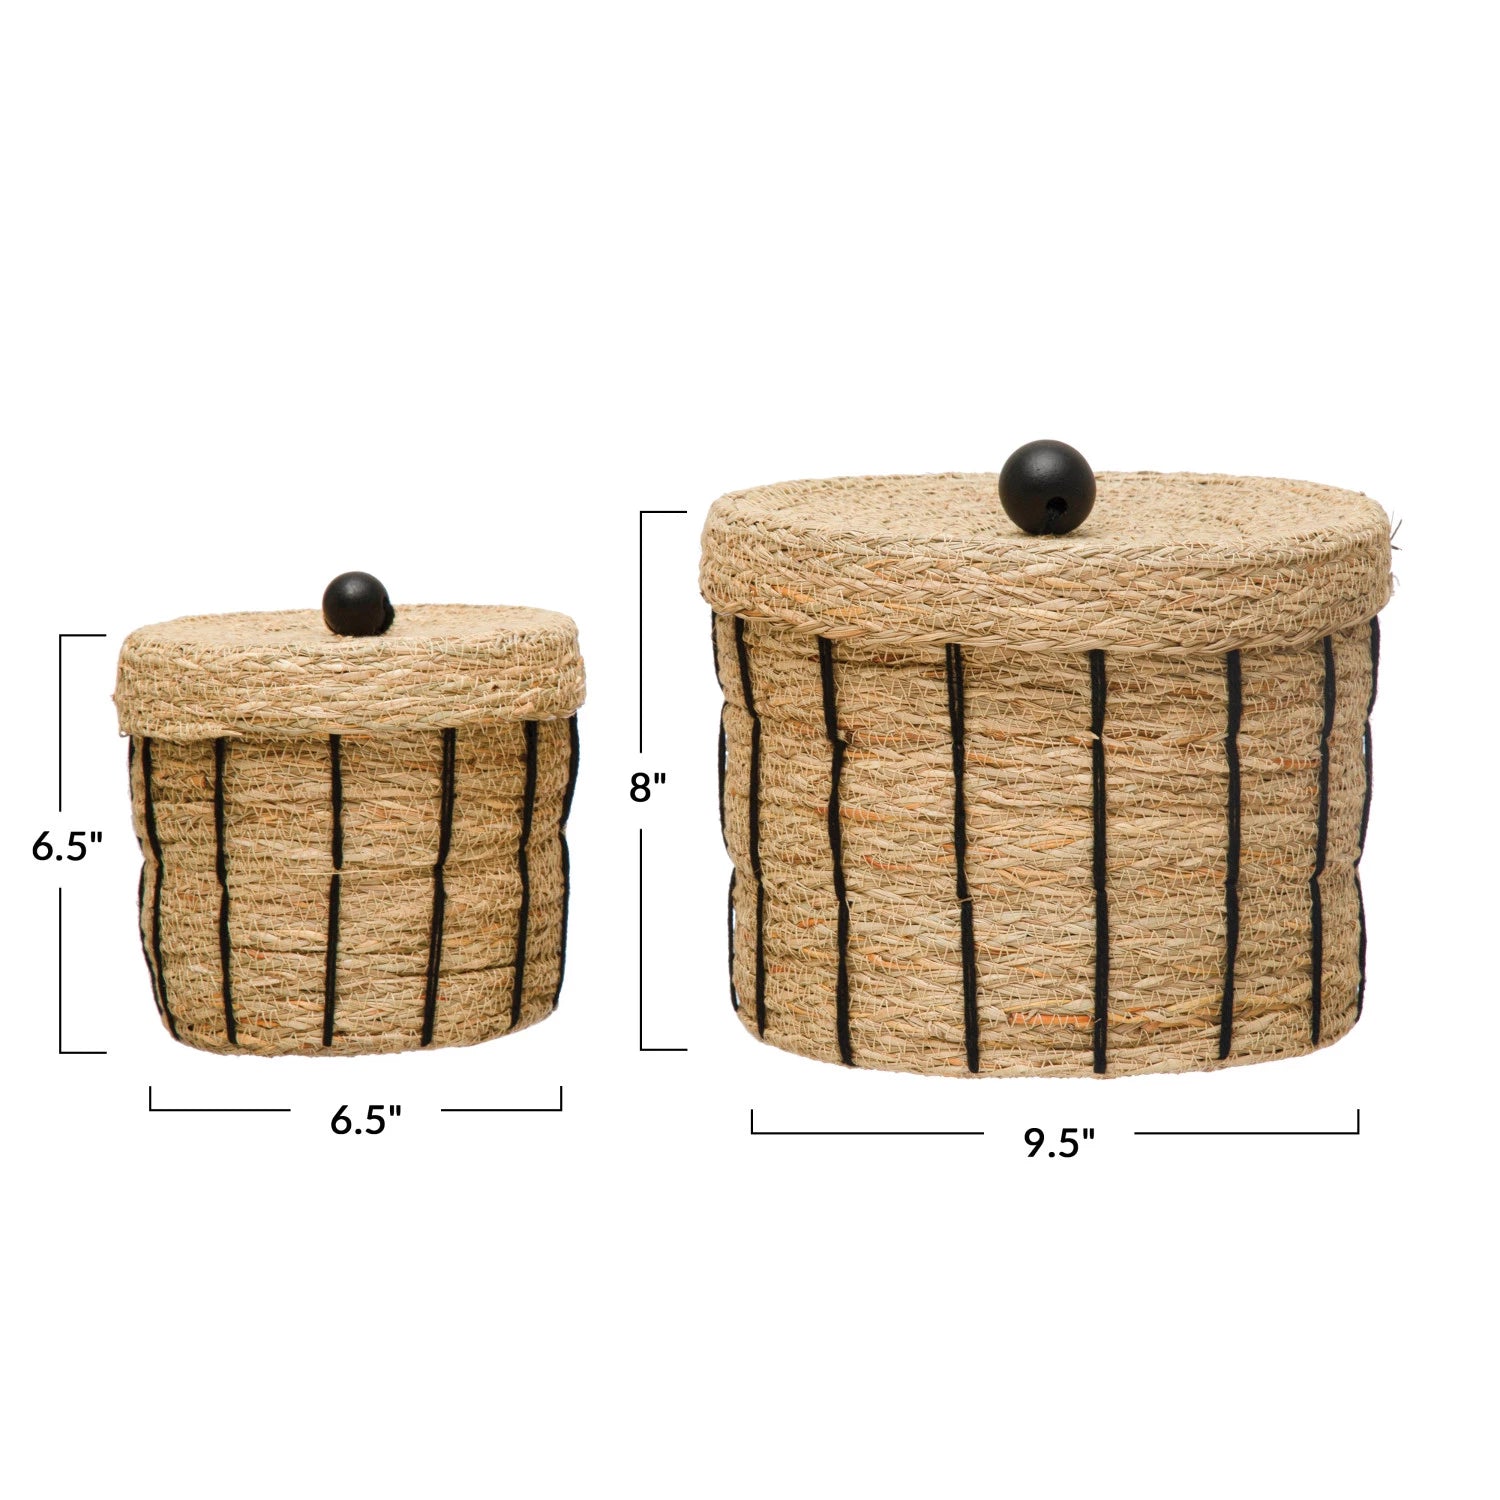 Seagrass Baskets w/ Lids, The Feathered Farmhouse